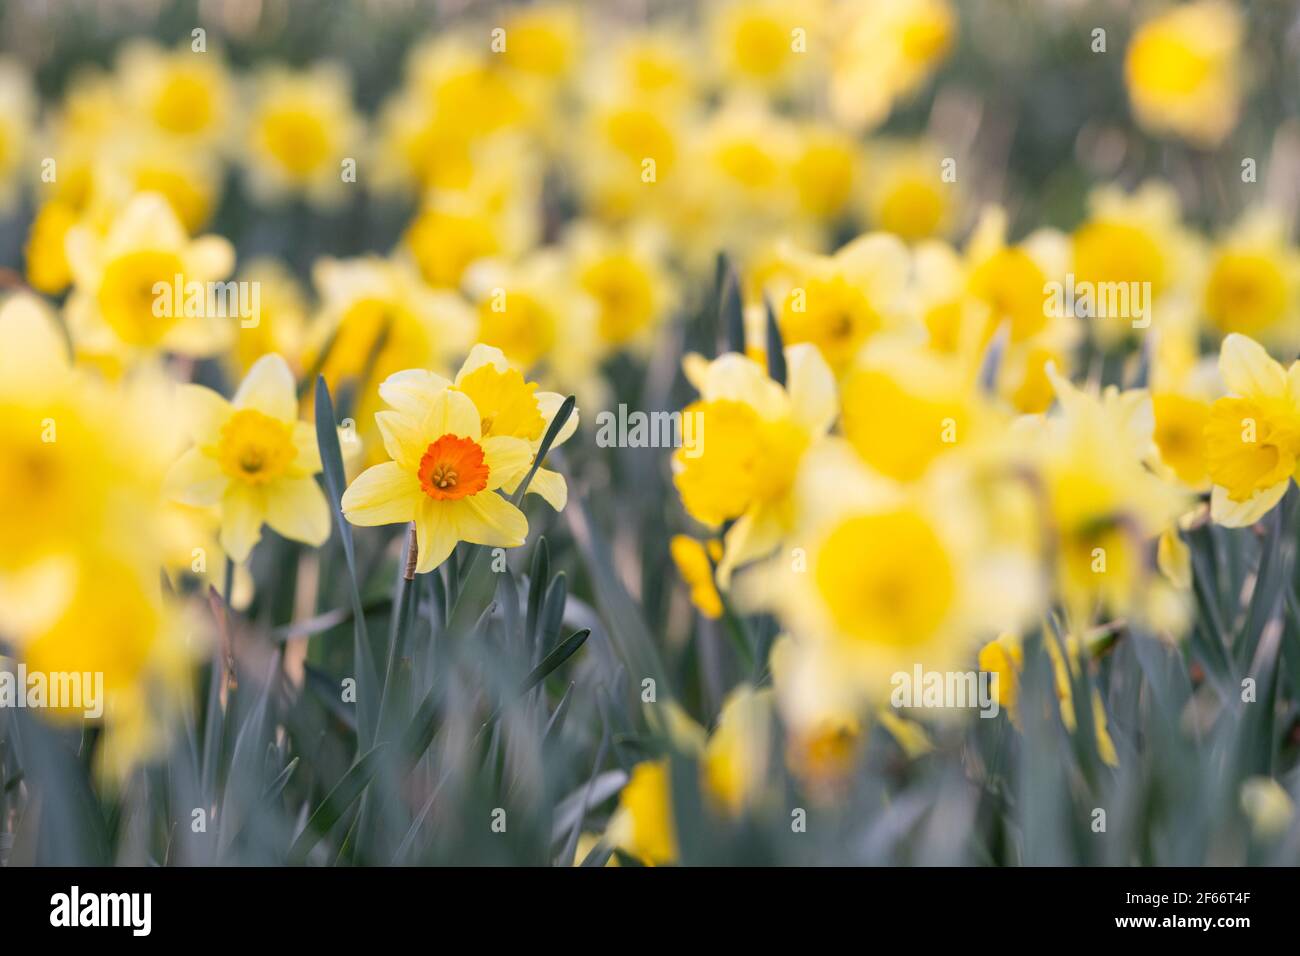 Orange daffodil (narcissus) in amongst a field of yellow daffodils. Odd one out, different, unique. Stock Photo